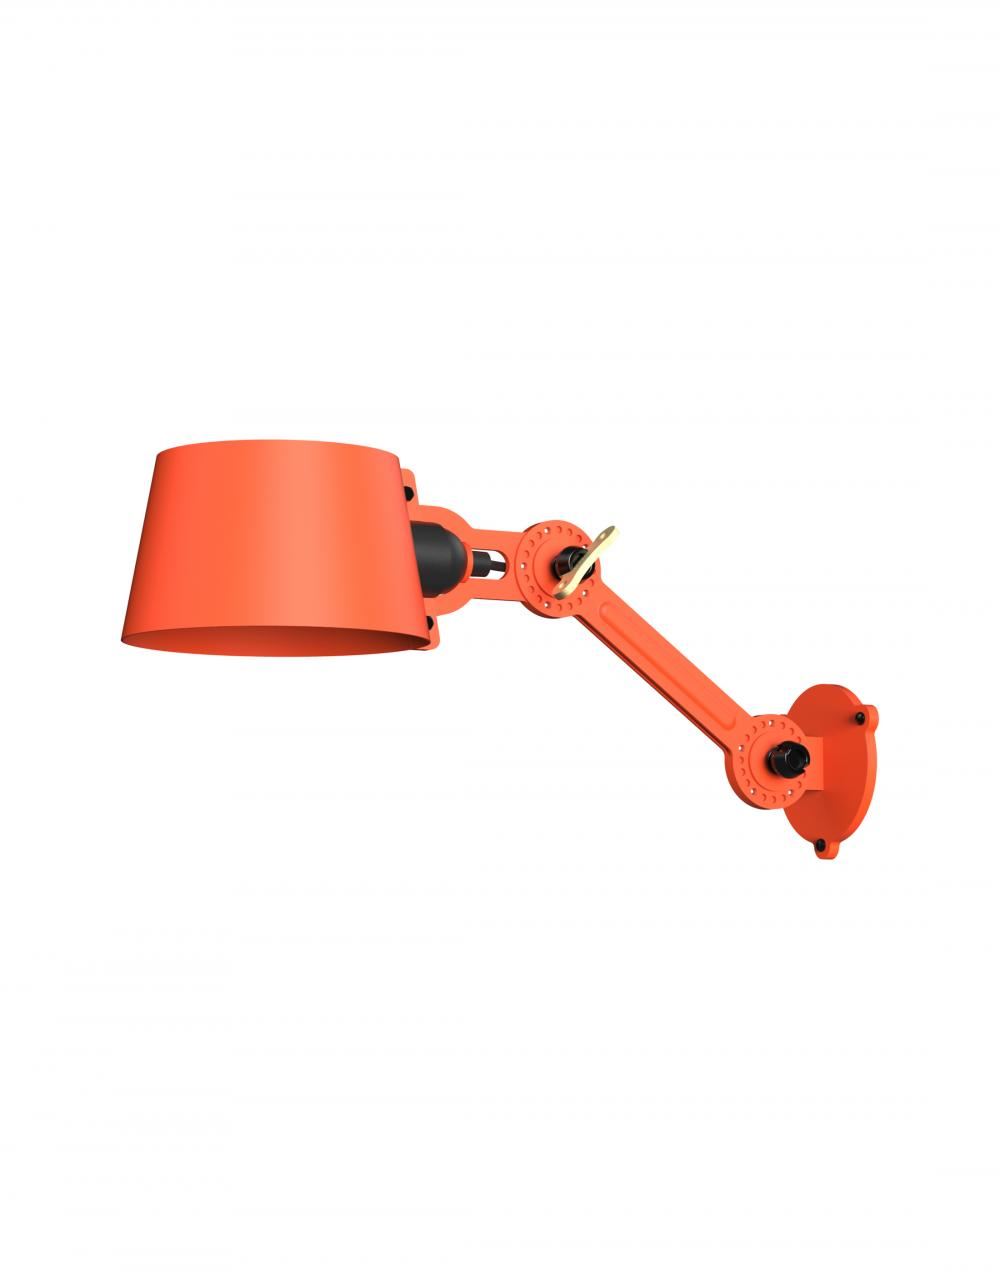 Bolt Wall Lamp Side Fit Small Striking Orange Hardwired For Cables From Wall